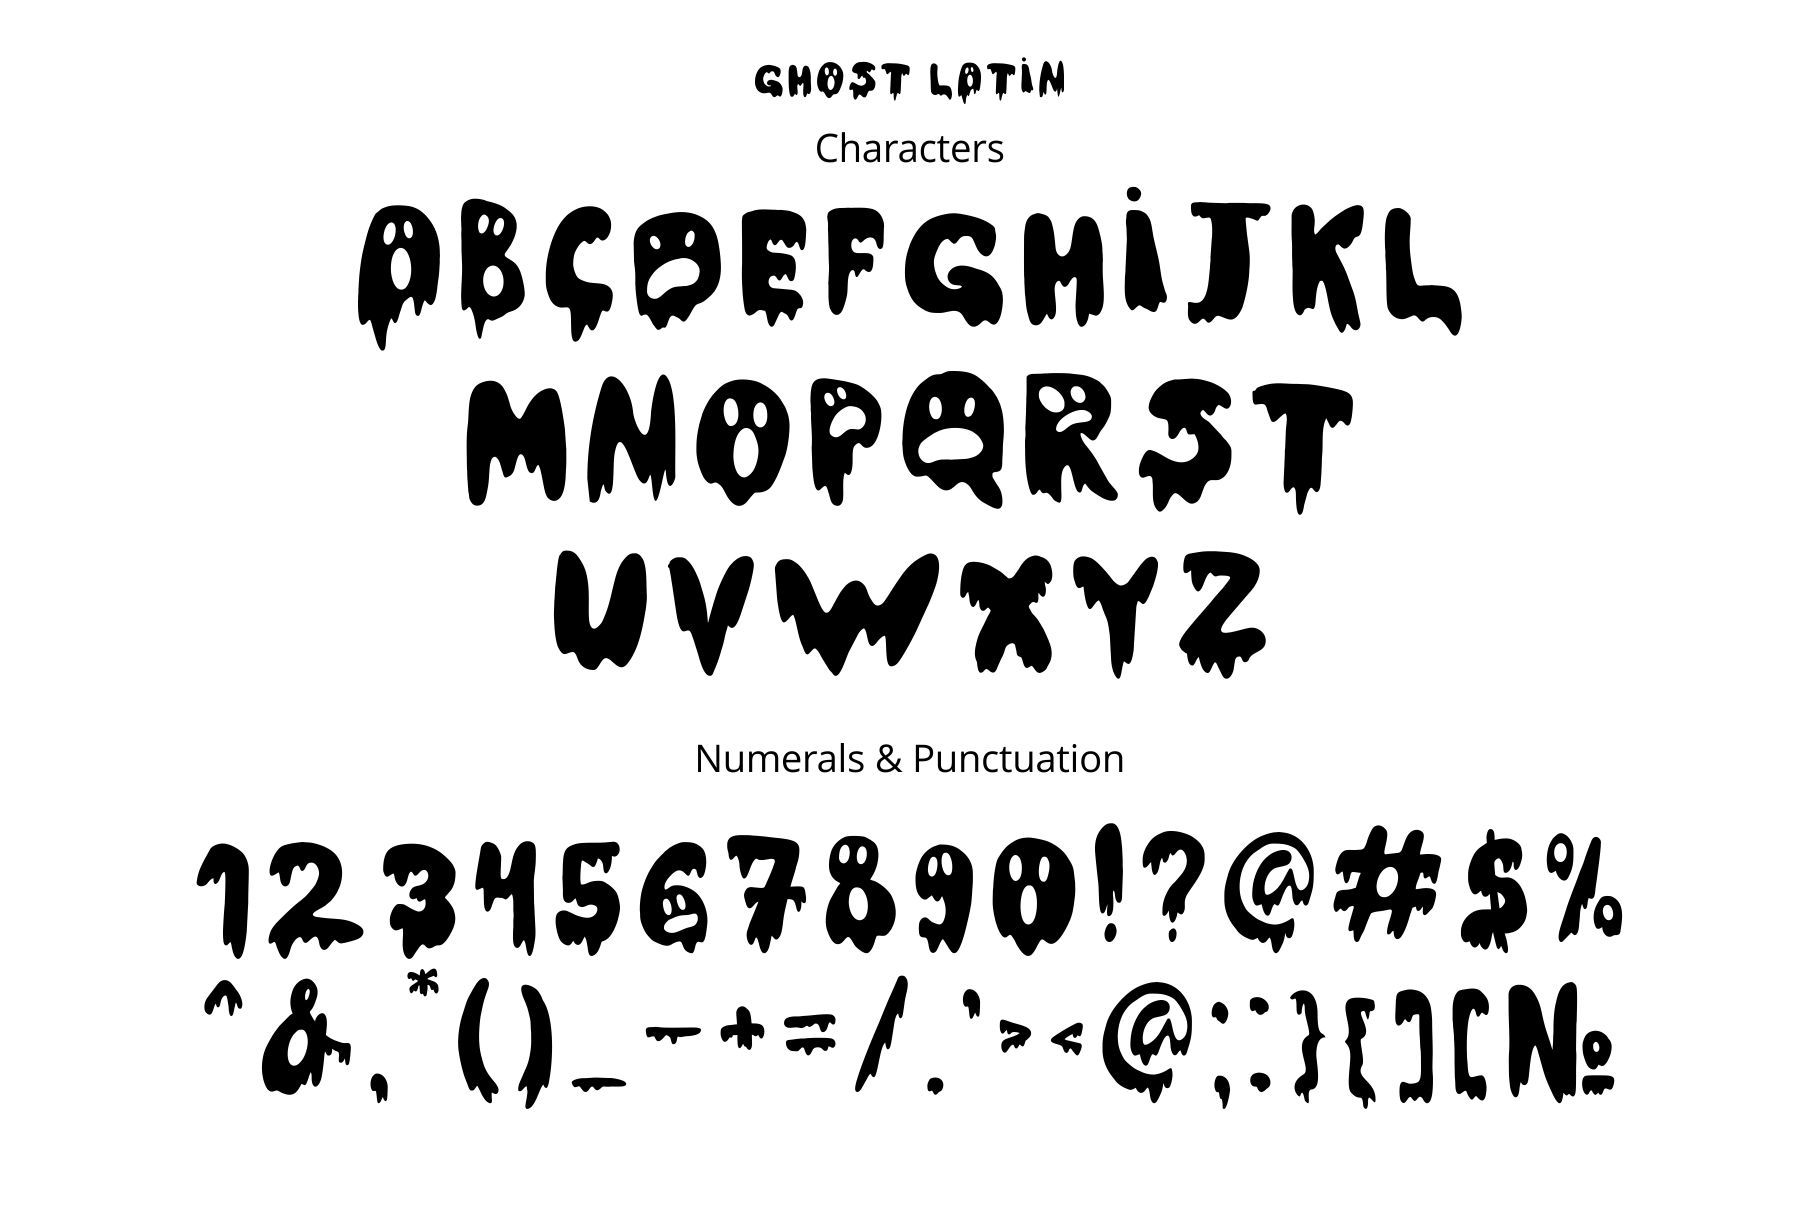 Latin letters with numerals & punctuation.